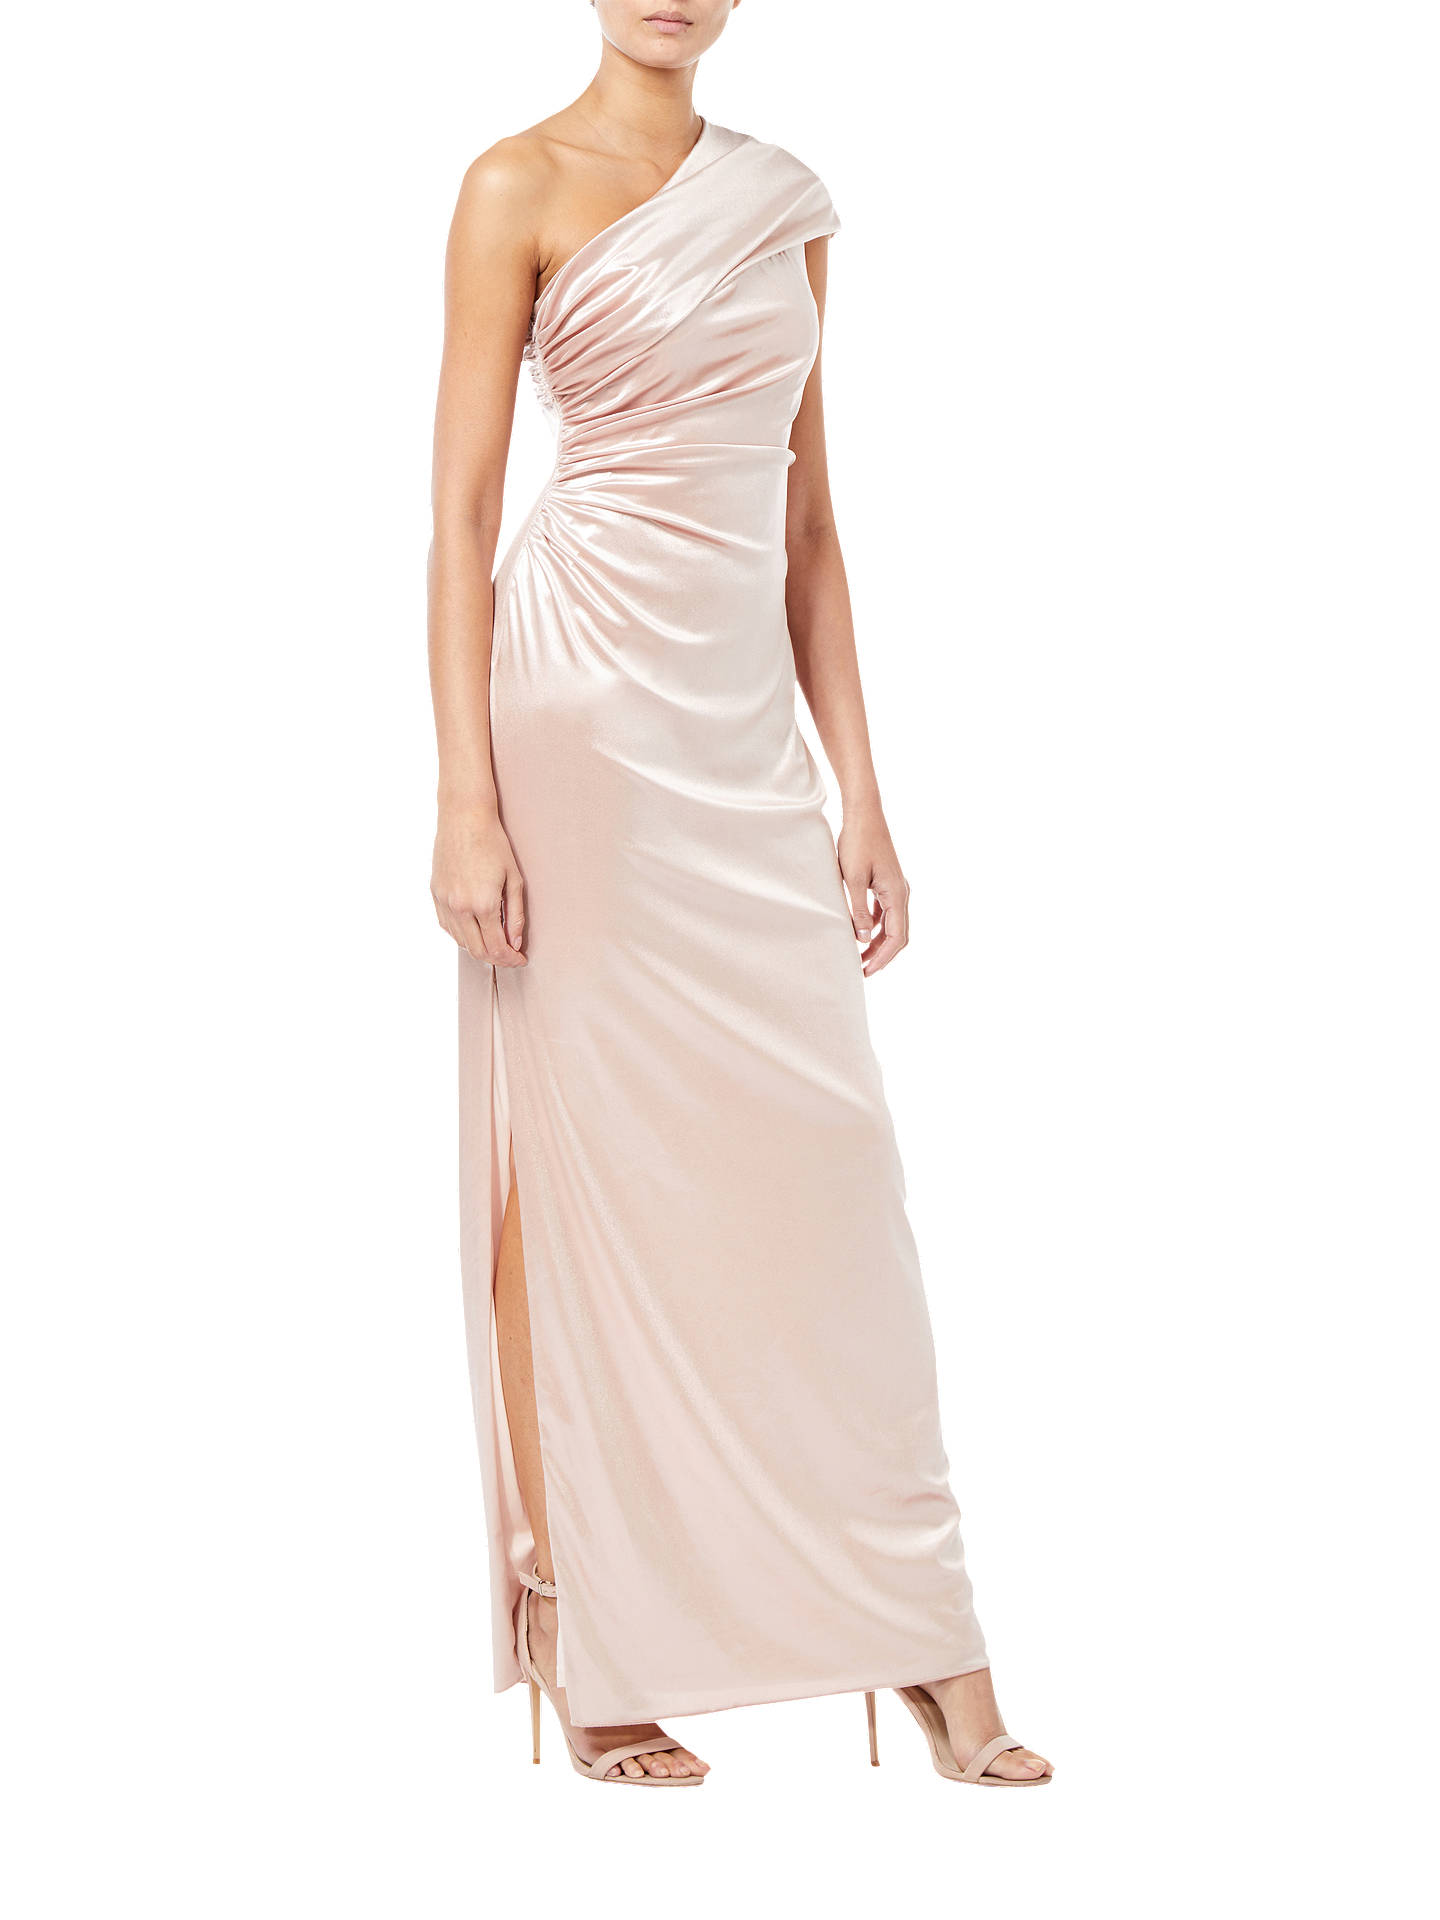 Adrianna Papell One Shoulder Dress, Blush at John Lewis & Partners